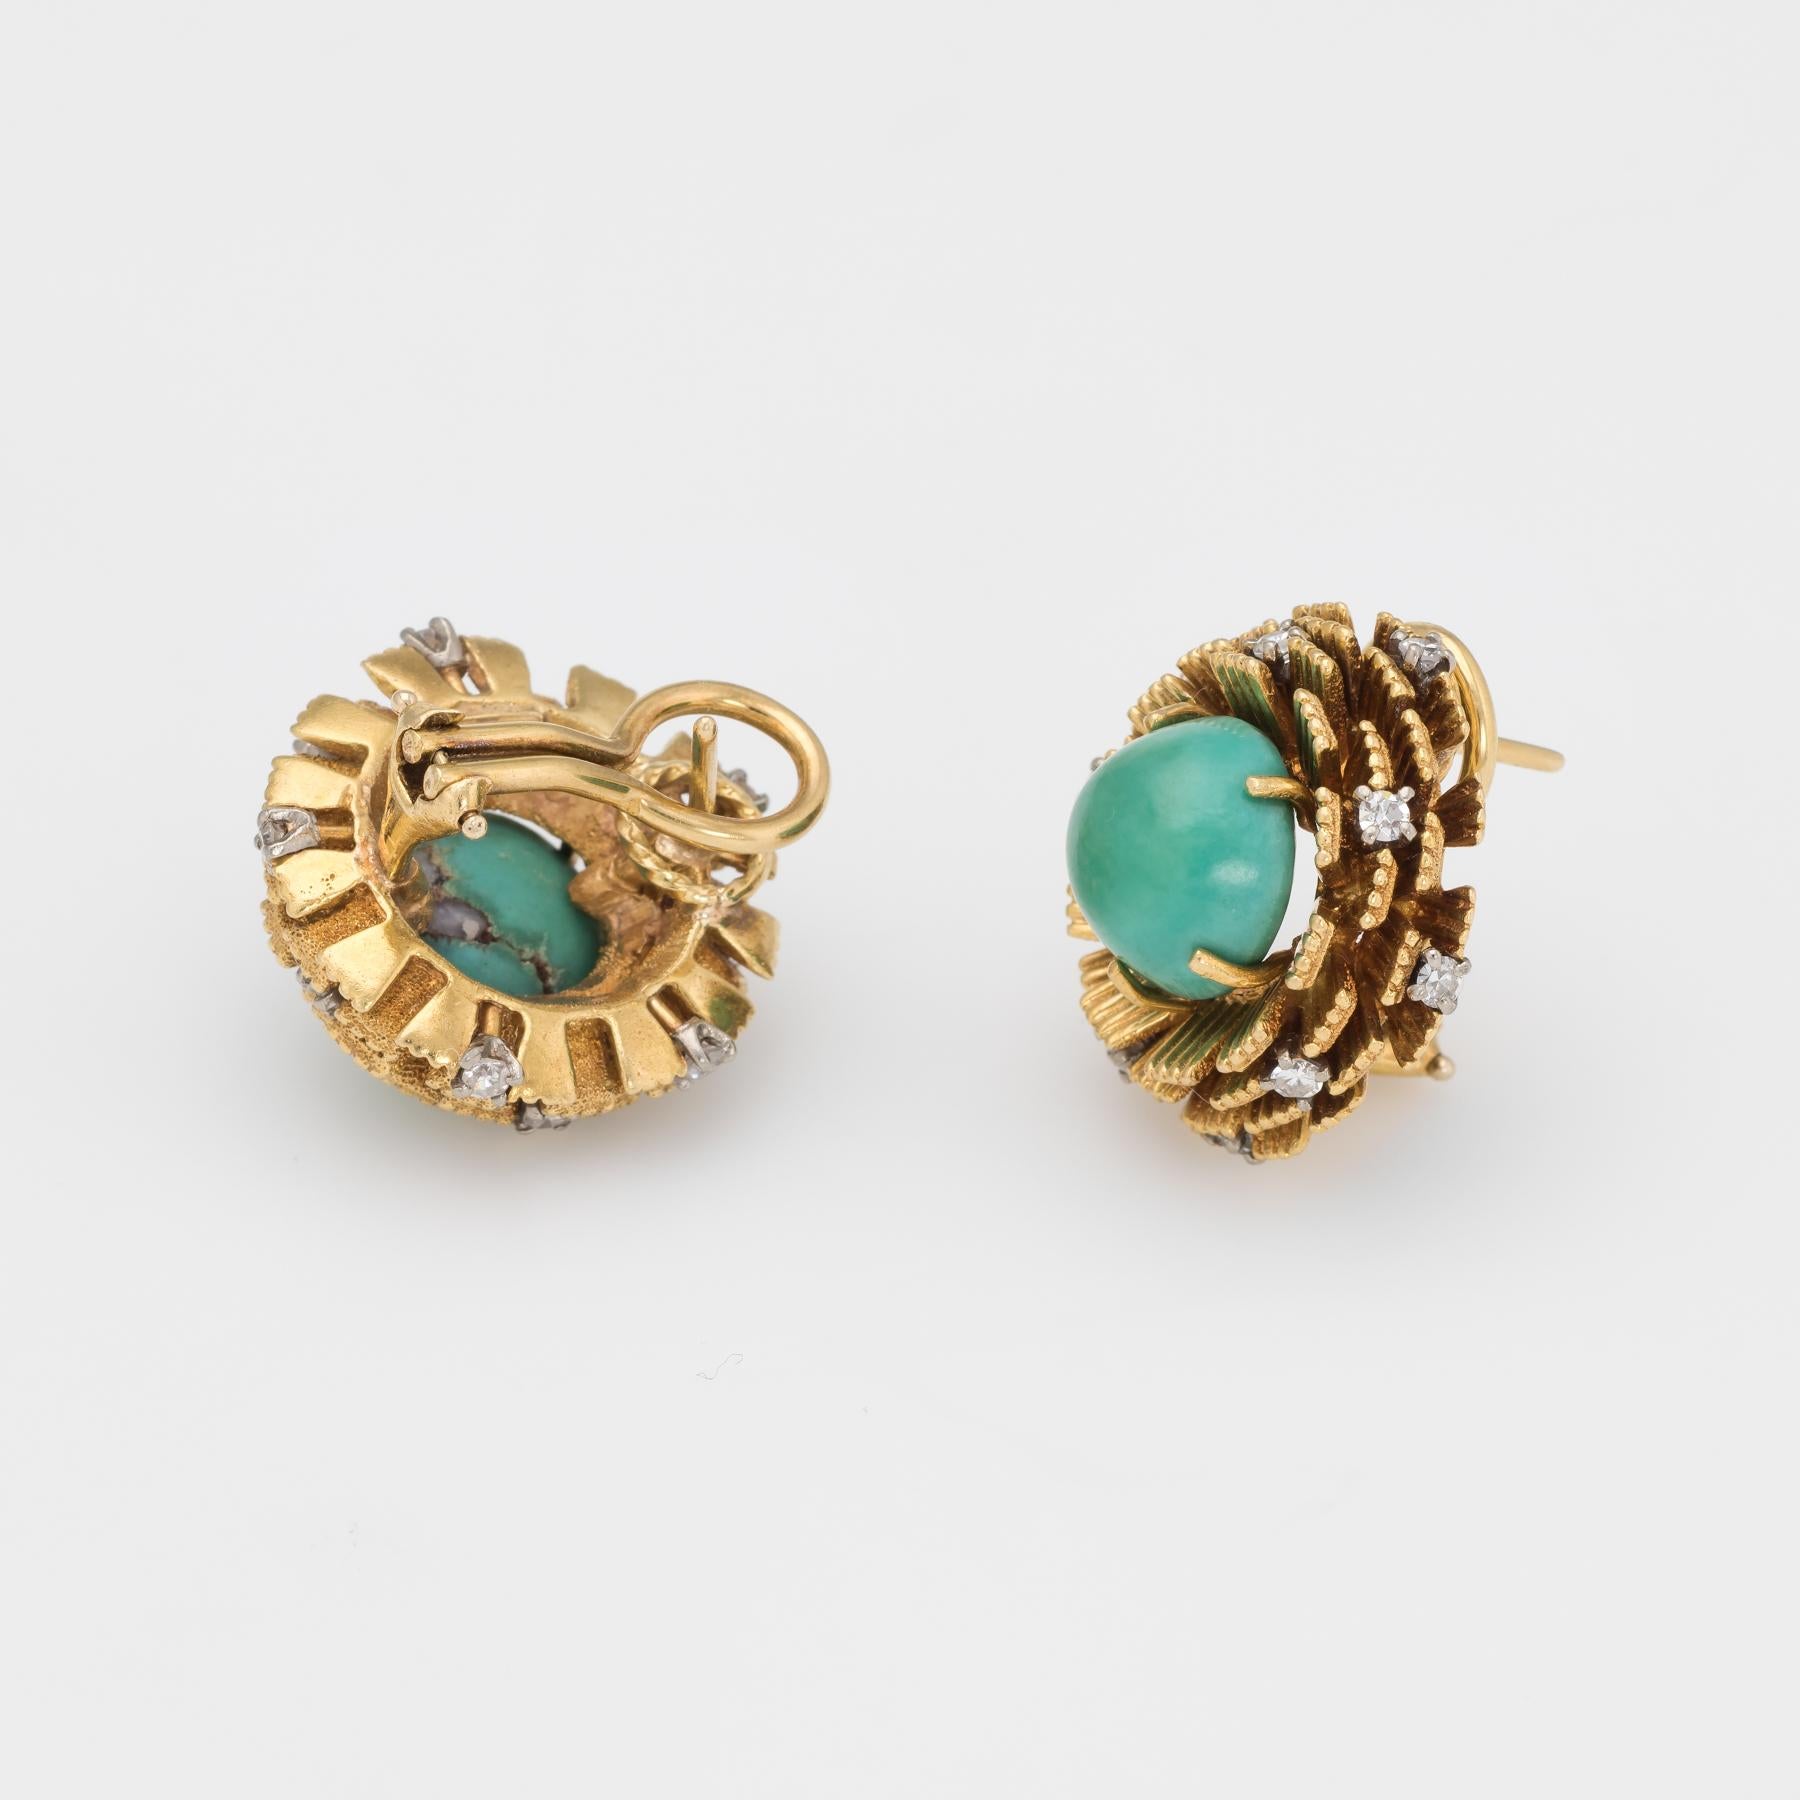 Finely detailed pair of vintage turquoise & diamond earrings (circa 1970s), crafted in 18k yellow gold. 

Turquoise cabochons measure 9.5mm (estimated at 4.50 carats each - 9 carats total estimated weight). The 20 diamonds are estimated at 0.01